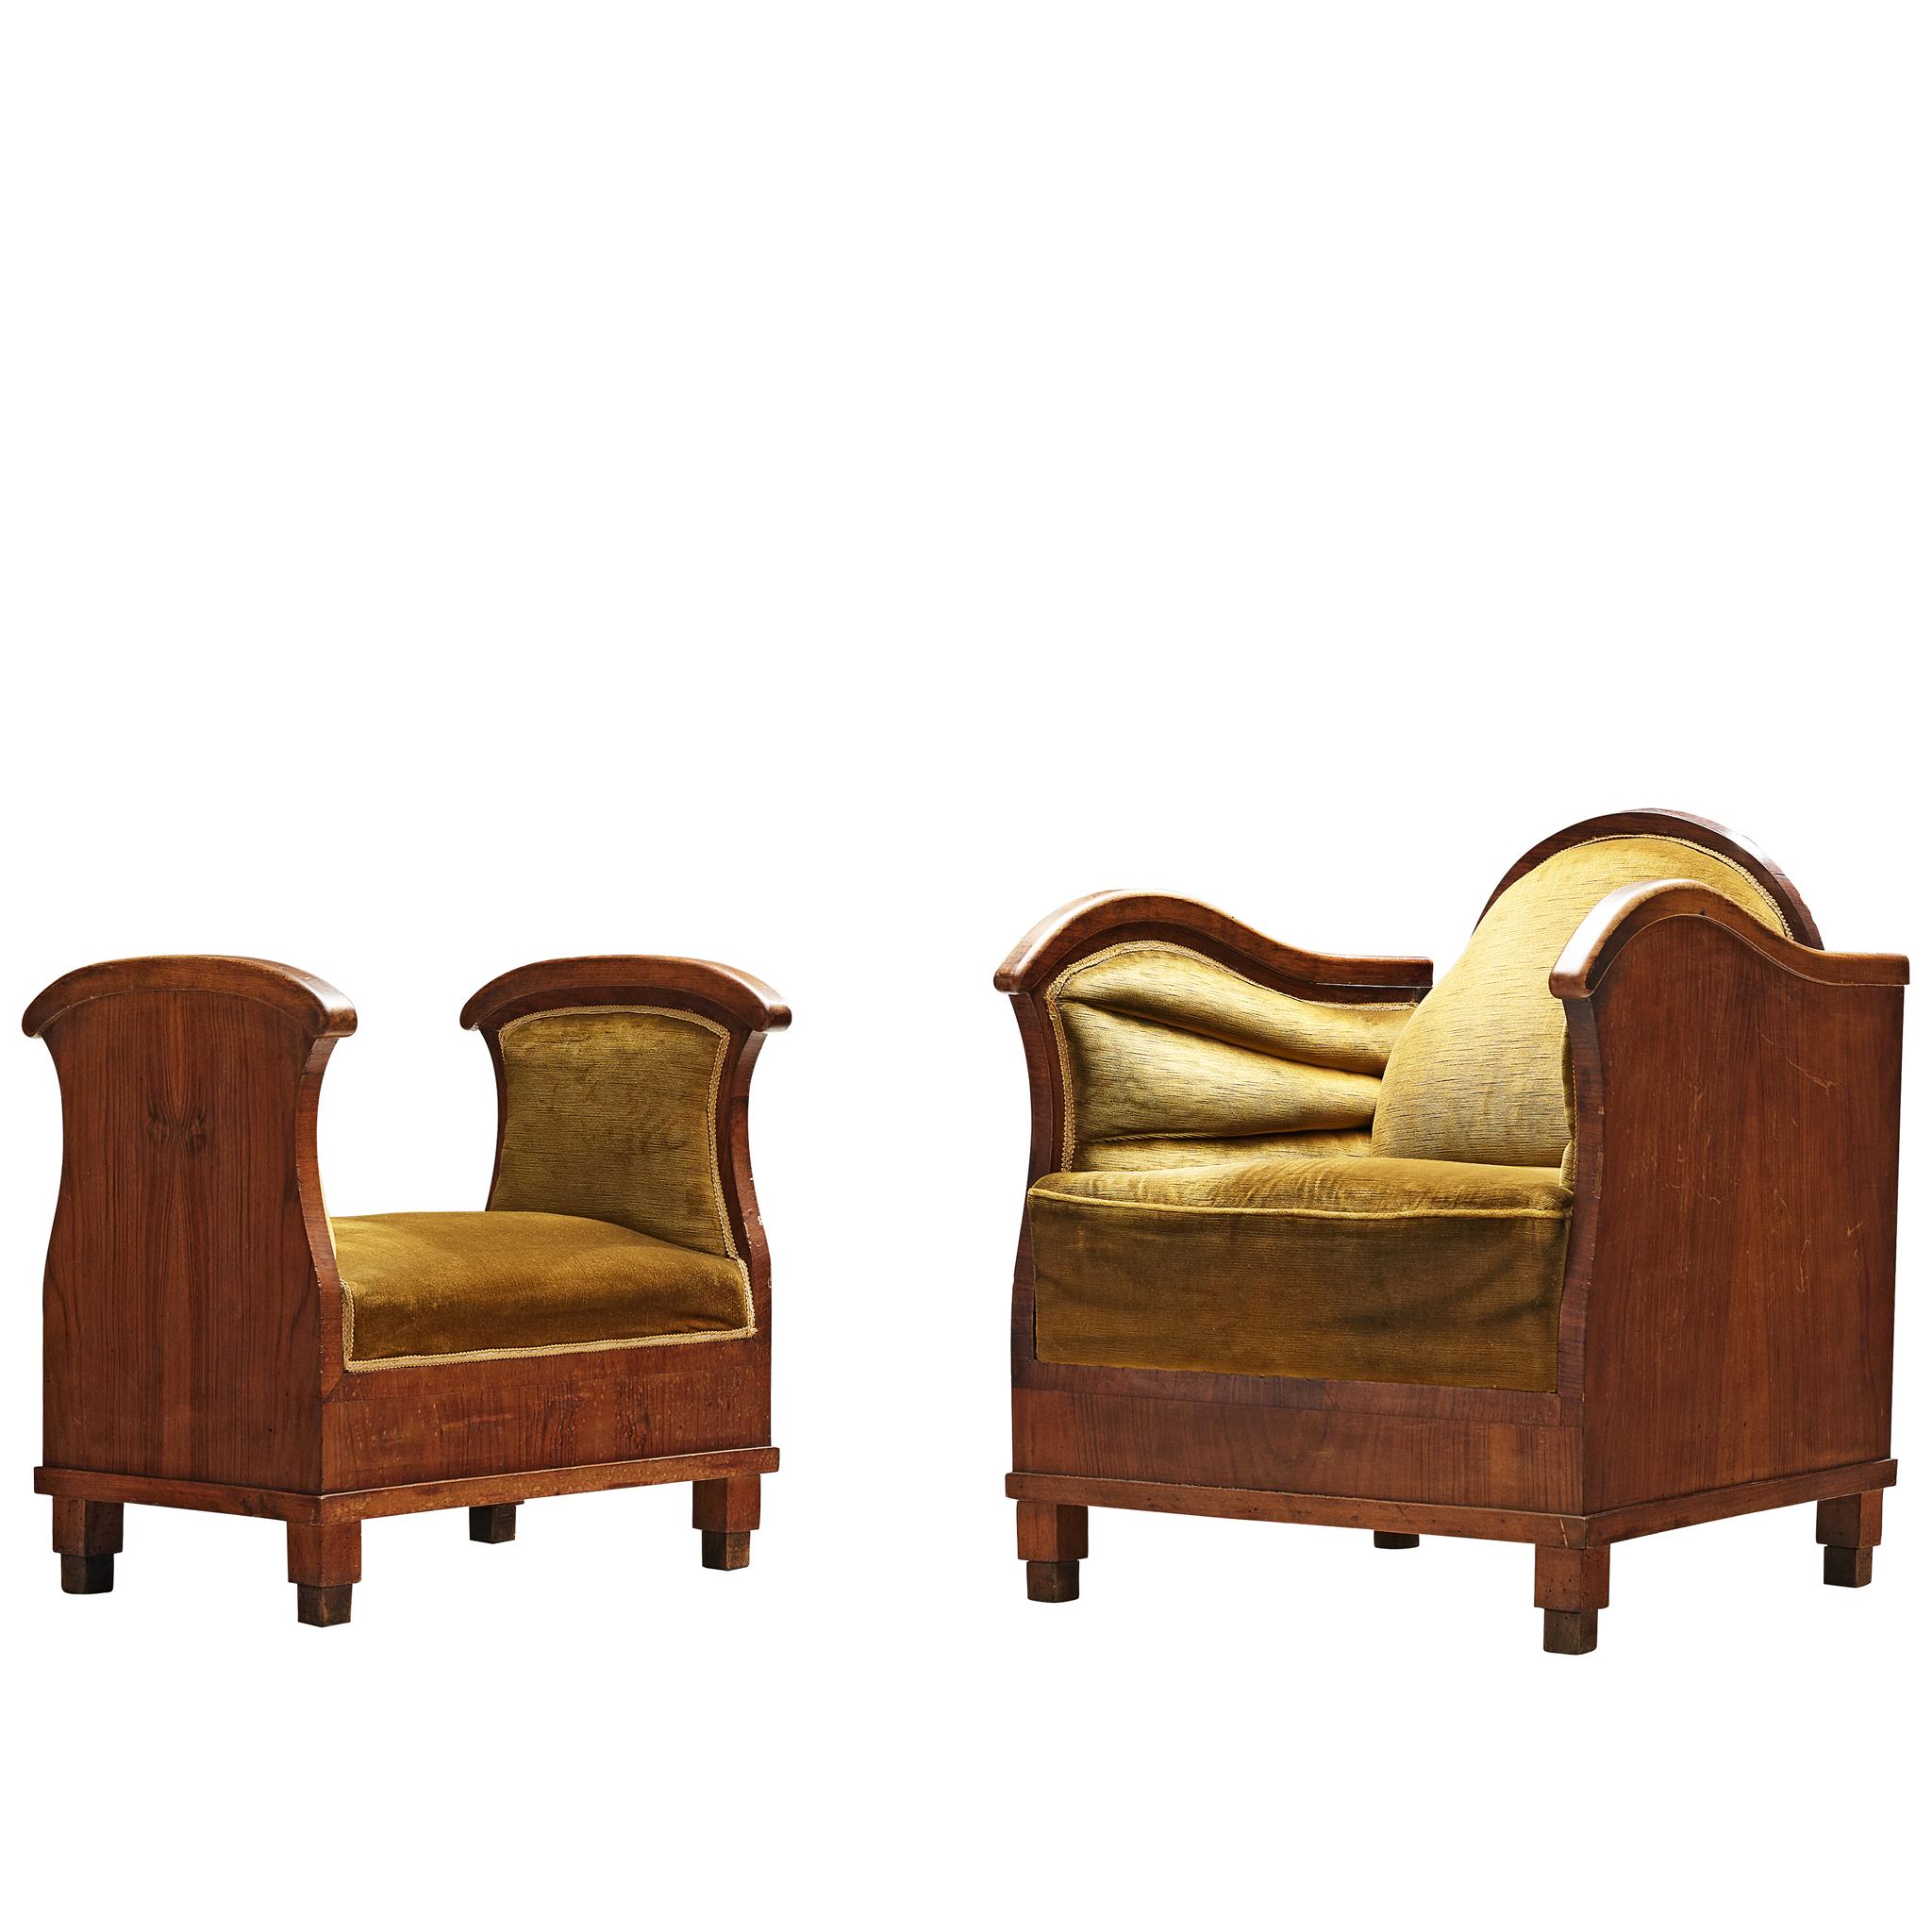 Art Deco lounge chairs in wood and moss green velour, Europe, 1930s. 

Set of two armchairs with accompanying ottomans upholstered in green velour. The comfortable chairs have a laidback backrest and wavy armrests, emphasized by the detailing in the